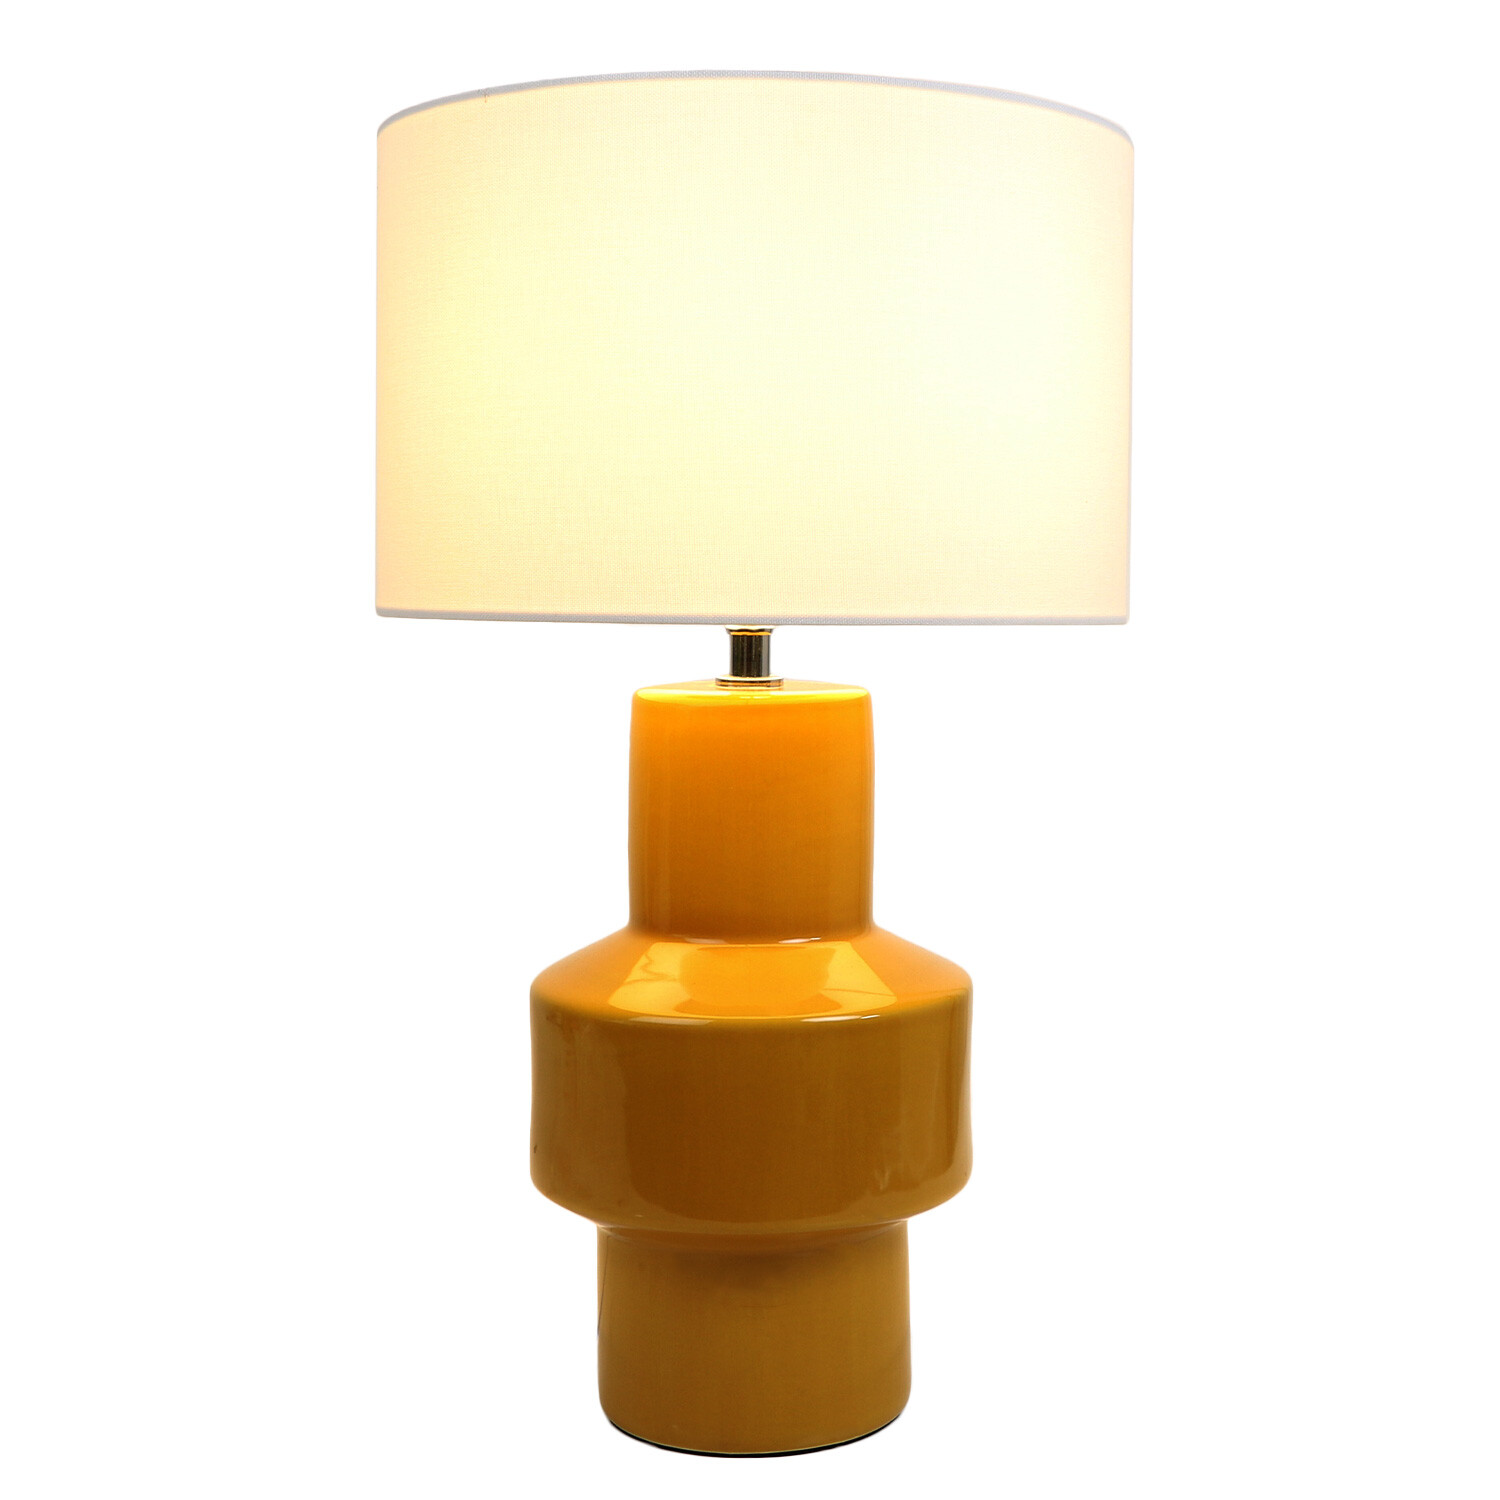 Canary Mustard Table Lamp Image 2